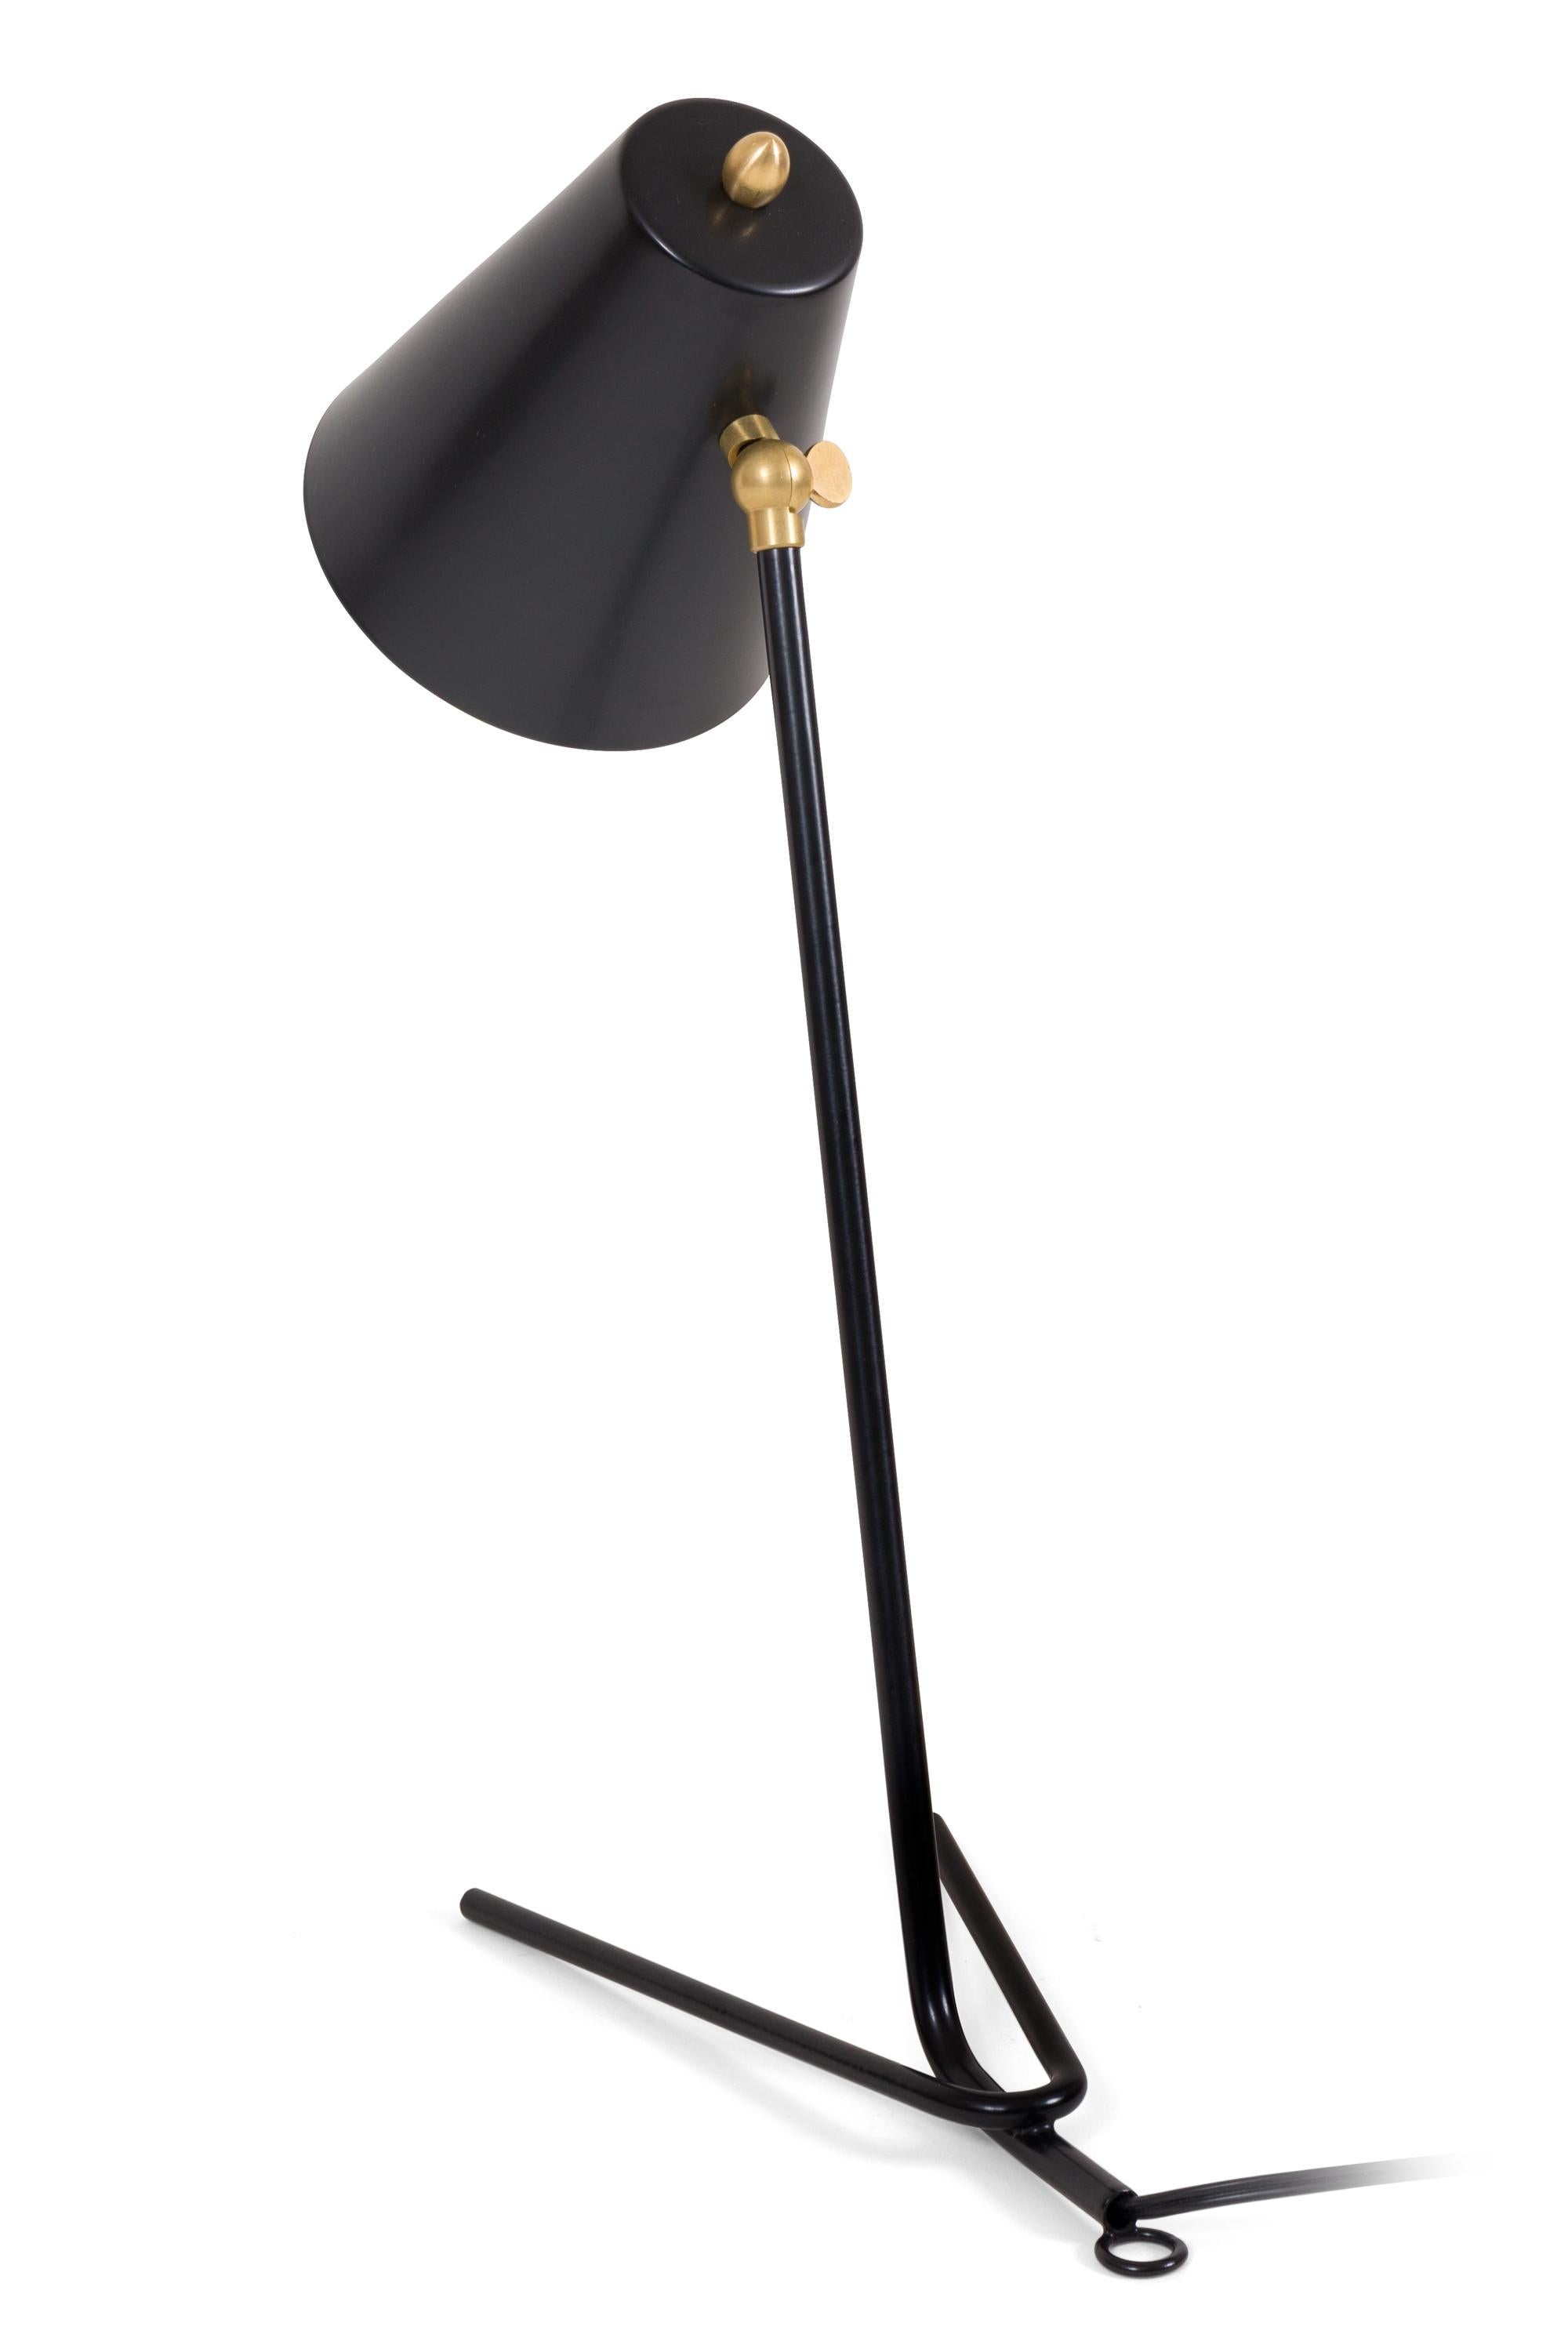 Painted Black Articulating Midcentury Style Italian Desk Lamp or Wall Light